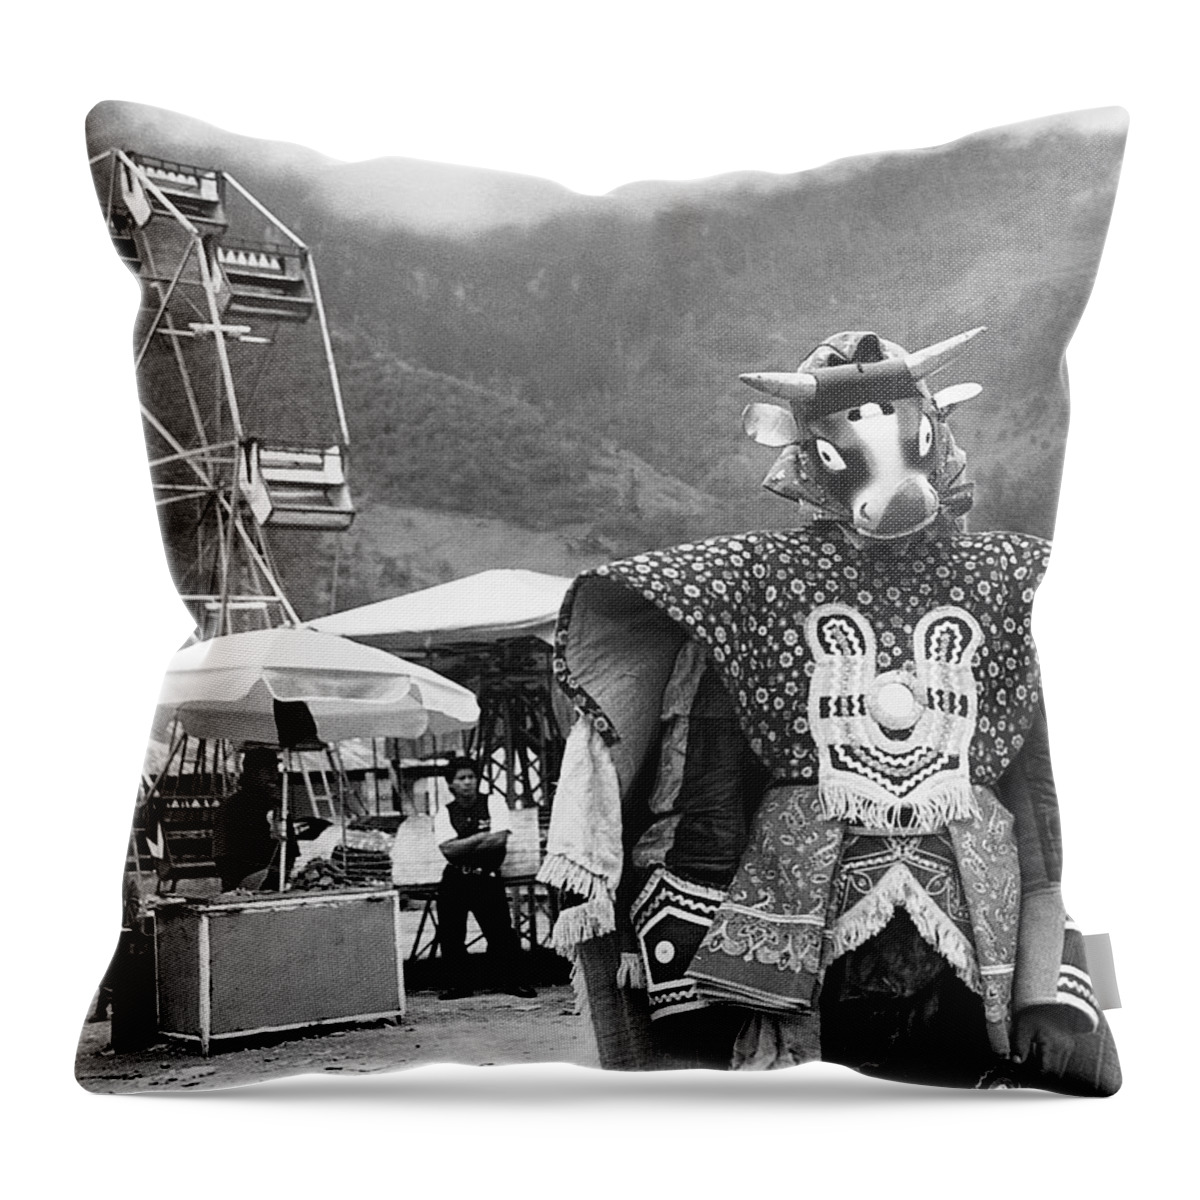 Guatemala Carnival Throw Pillow featuring the photograph Guatemala Carnival by Neil Pankler